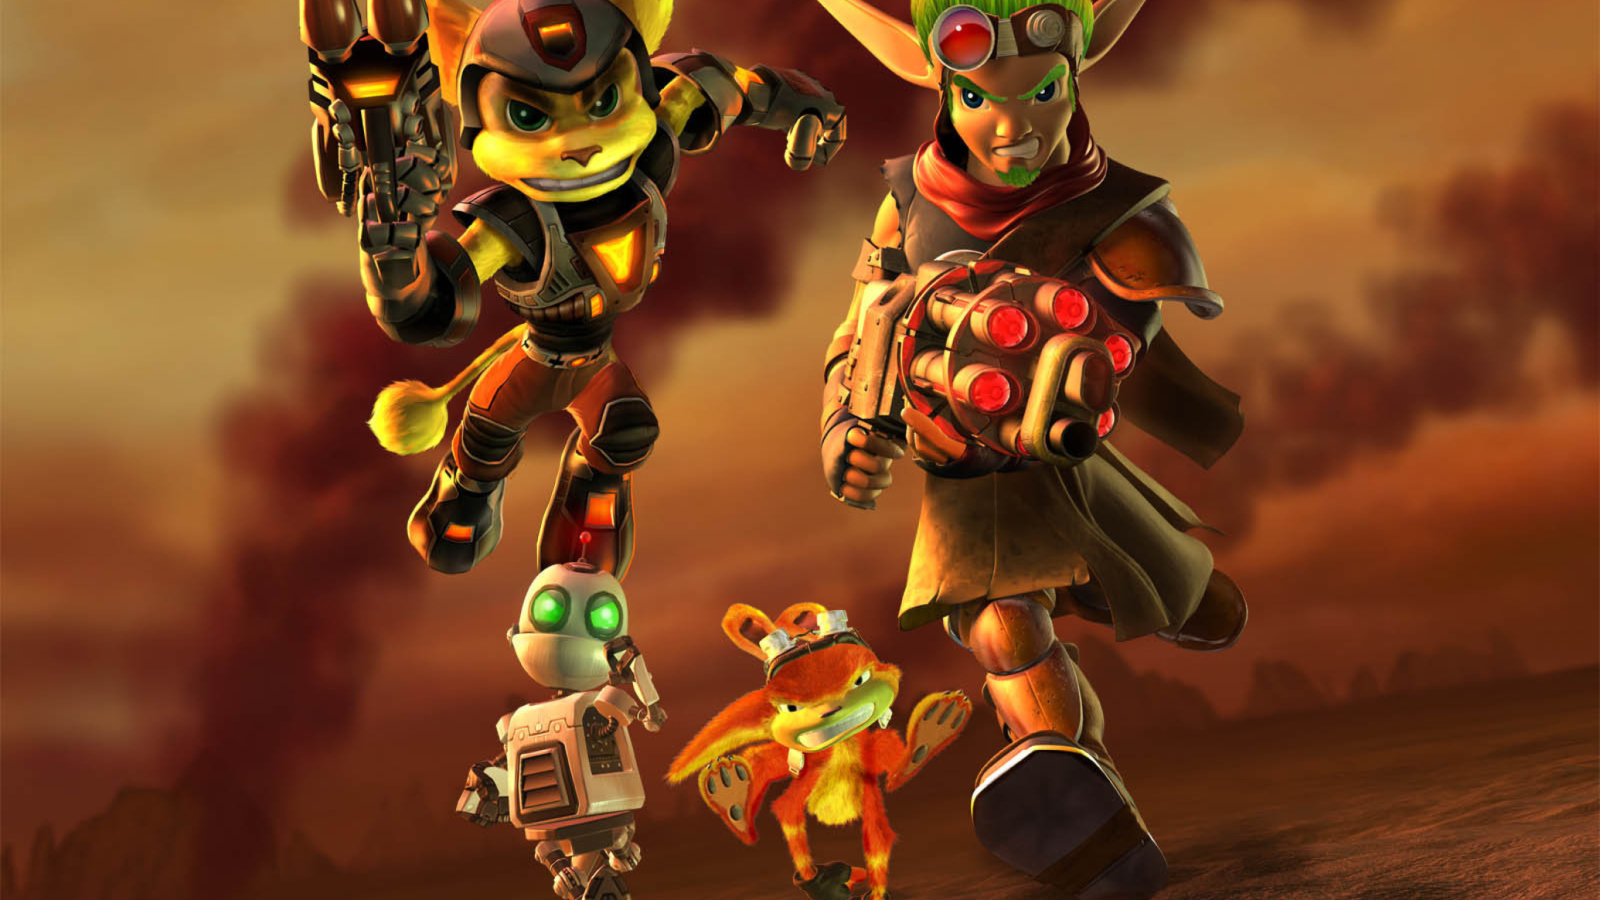 Jak and Daxter - Ratchet and Clank wallpaper 1600x900